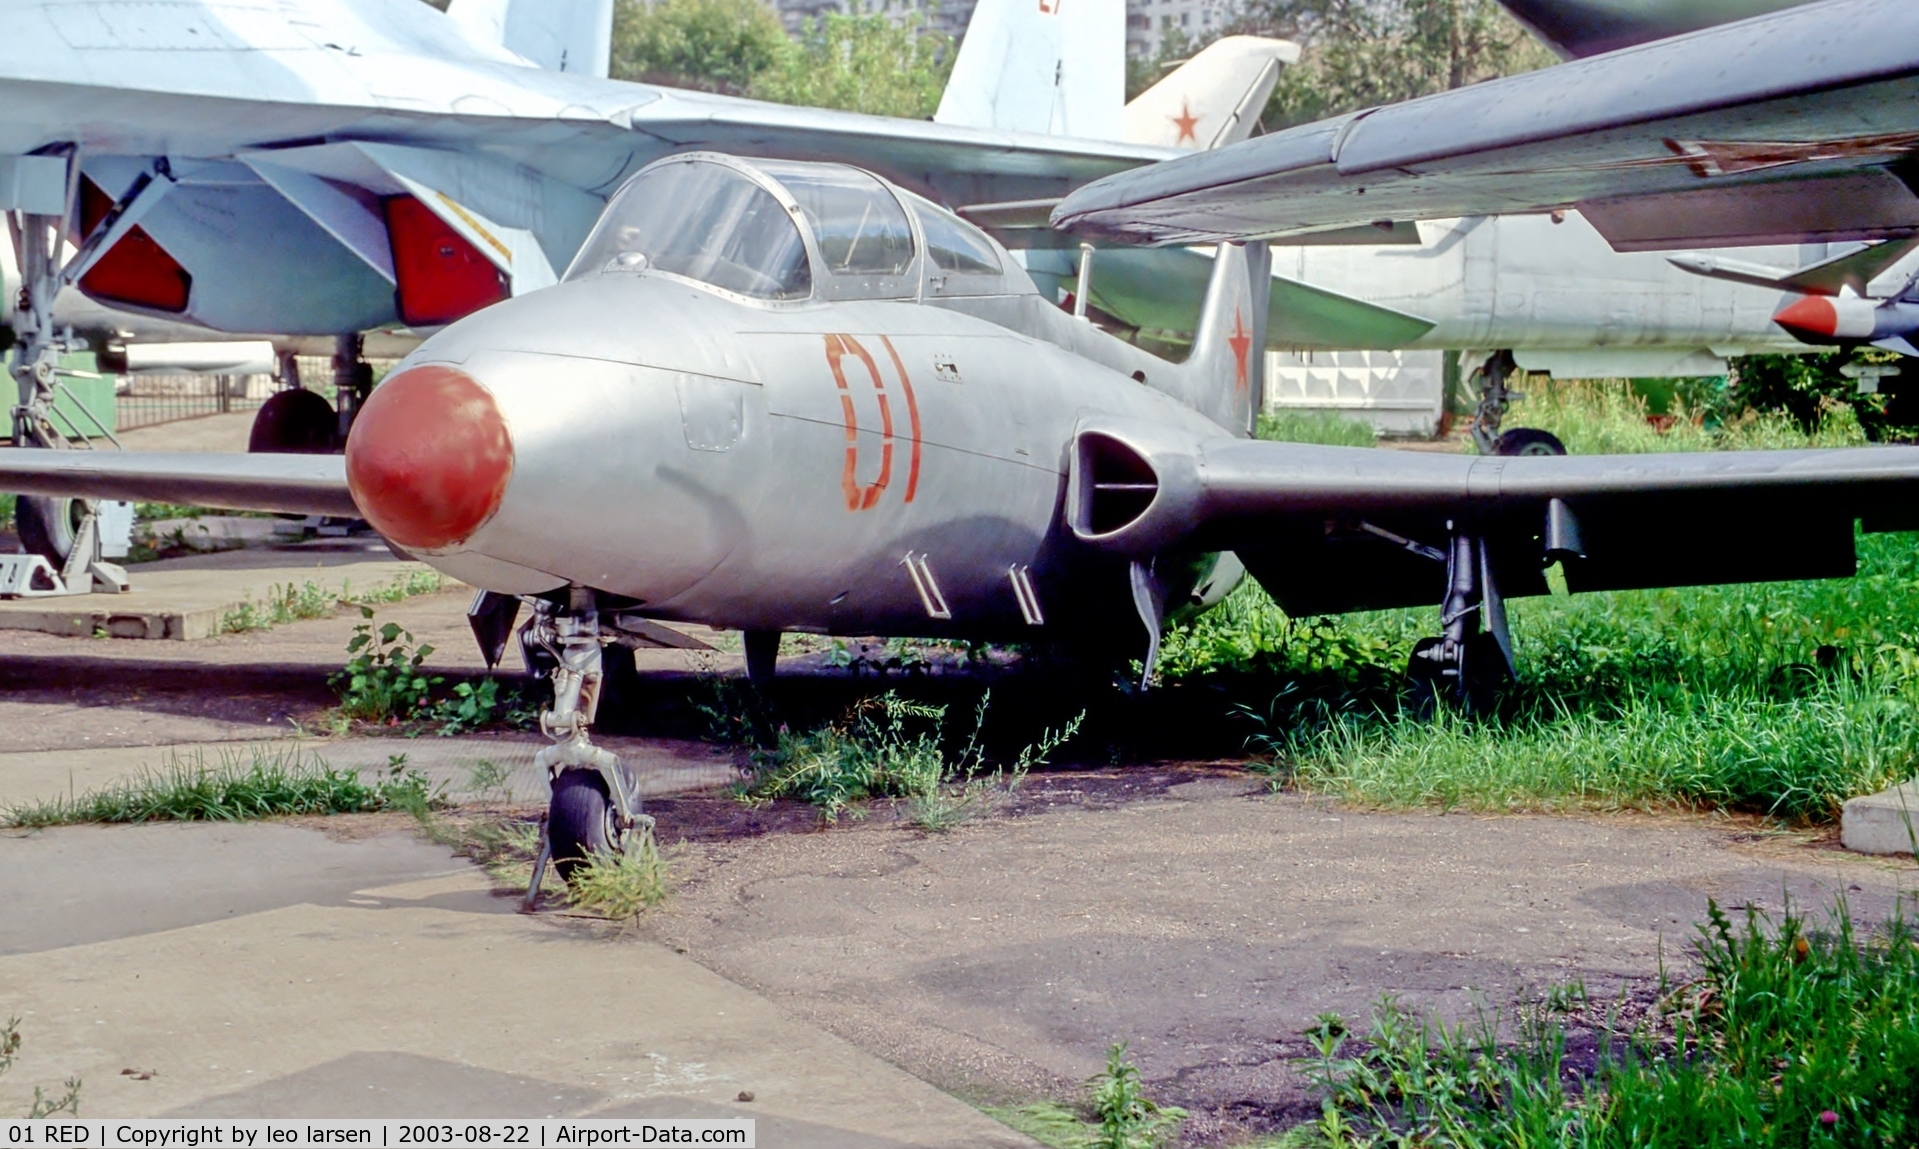 01 RED, Aero L-29 C/N 49 1282, Central Museum of Armed Forces 22.8.2003